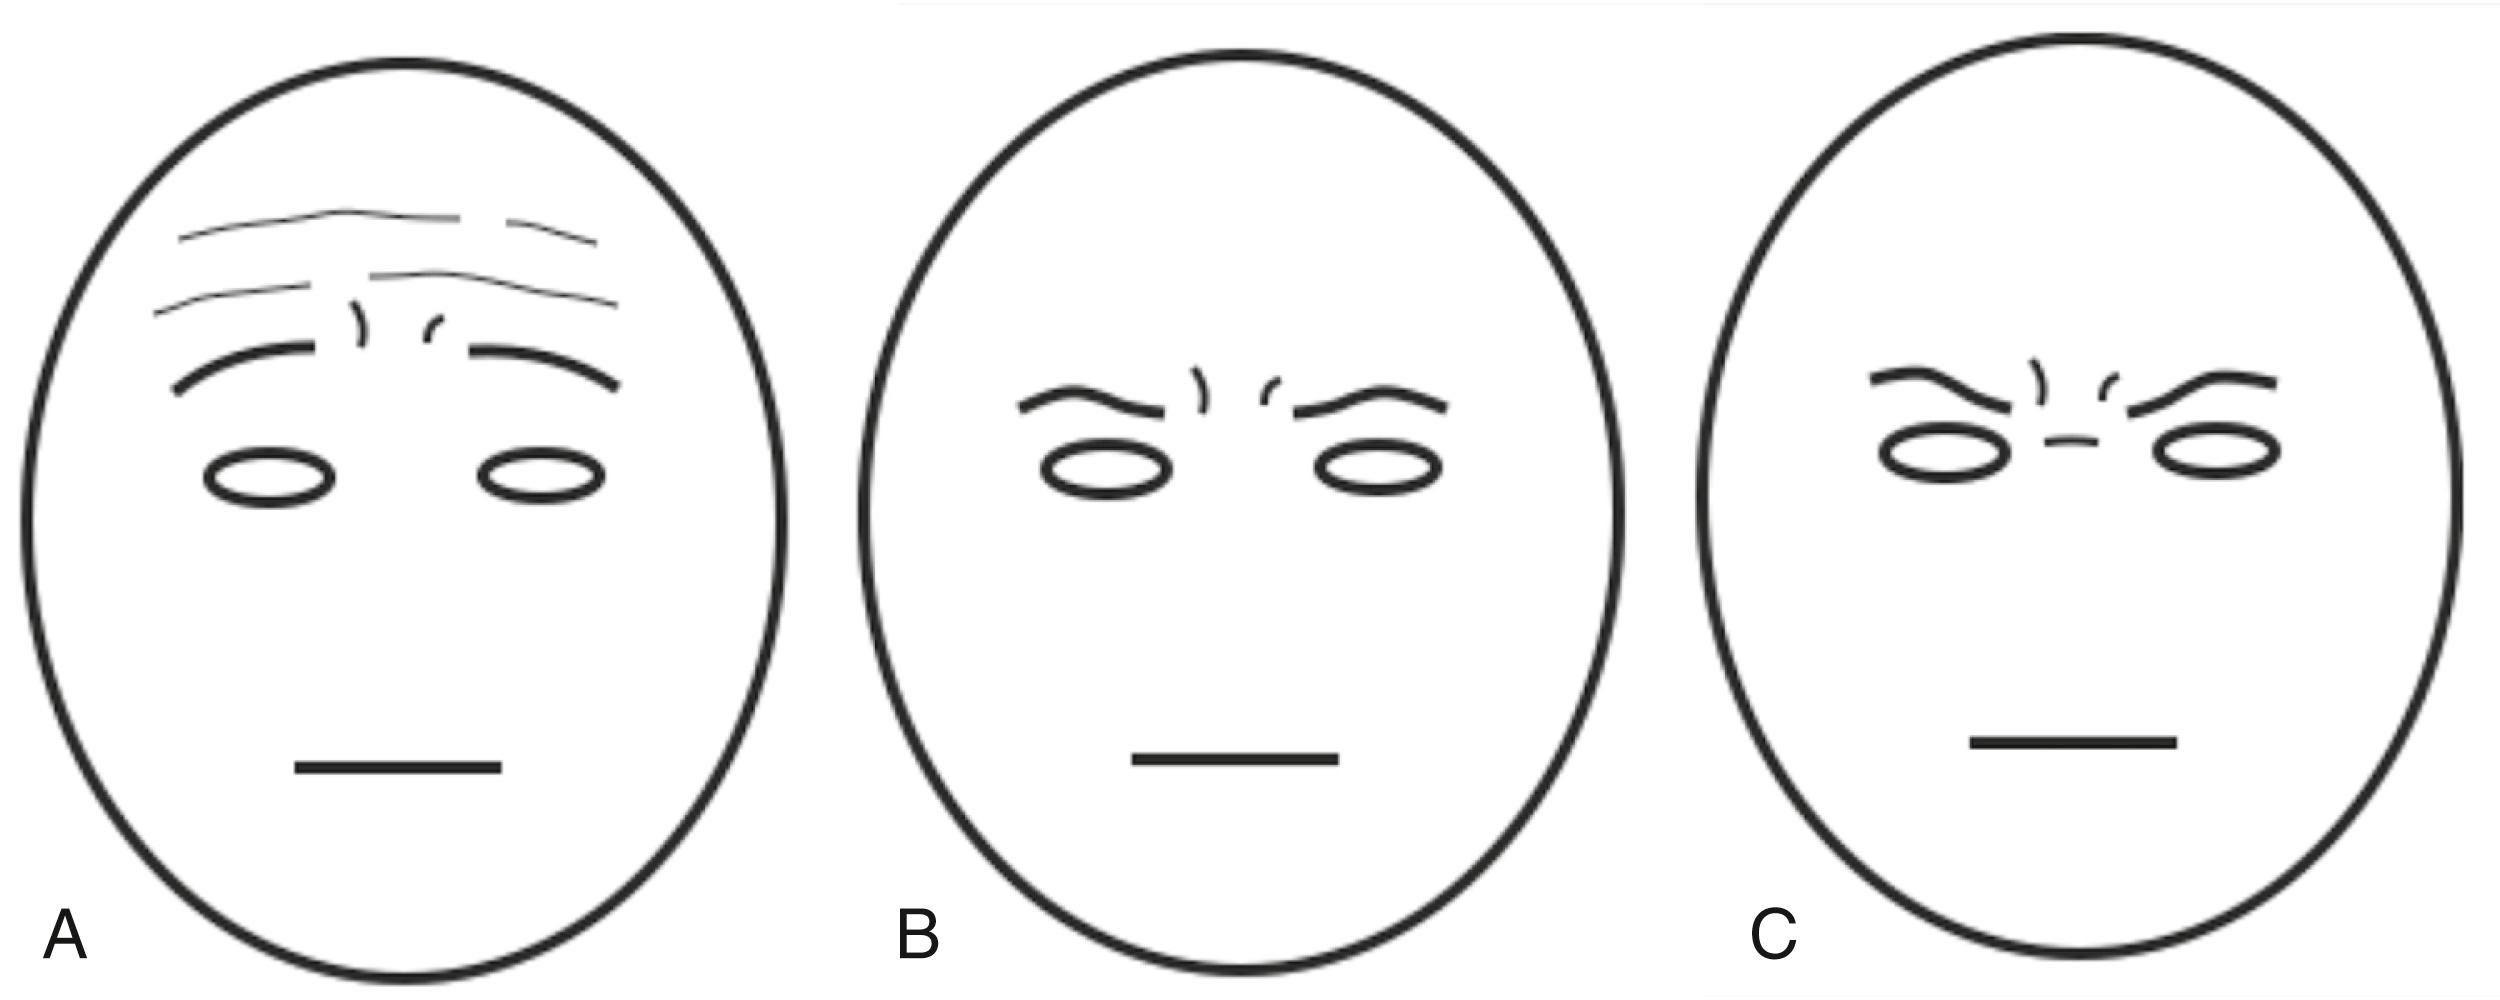 Fig. 63.7, Forehead aging and inappropriate expressions. (A) Typical appearance of patient with forehead aging and blepharochalasis before surgery. In an effort to clear upper-lateral visual field obstruction the patient uses frontalis muscles to hold up the eyebrows. Because the majority of the frontalis muscle is situated medially, this produces an exaggerated elevation of the medial eyebrow. Eyebrow elevation, in conjunction with corrugation of the forehead, results in a sad, tired, and melancholic appearance. Note that glabellar frown lines in this situation do not appear menacing and add a pained element to the melancholic appearance. (B) Typical appearance of a patient with unrecognized forehead ptosis after upper blepharoplasty alone. Upper blepharoplasty has removed the eyelid skin that provided the stimulus for frontalis muscle action, the frontalis has relaxed, and the full extent of forehead ptosis is now evident. This results in a lowering of the eyebrows. Note that the glabellar frown lines now convey a stern or angry appearance. (C) Same face and circumstances as in (B) but with the addition of a transverse upper nasal crease. Chronic procerus contraction amplifies an angry appearance and creates a look of disapproval and aggression.